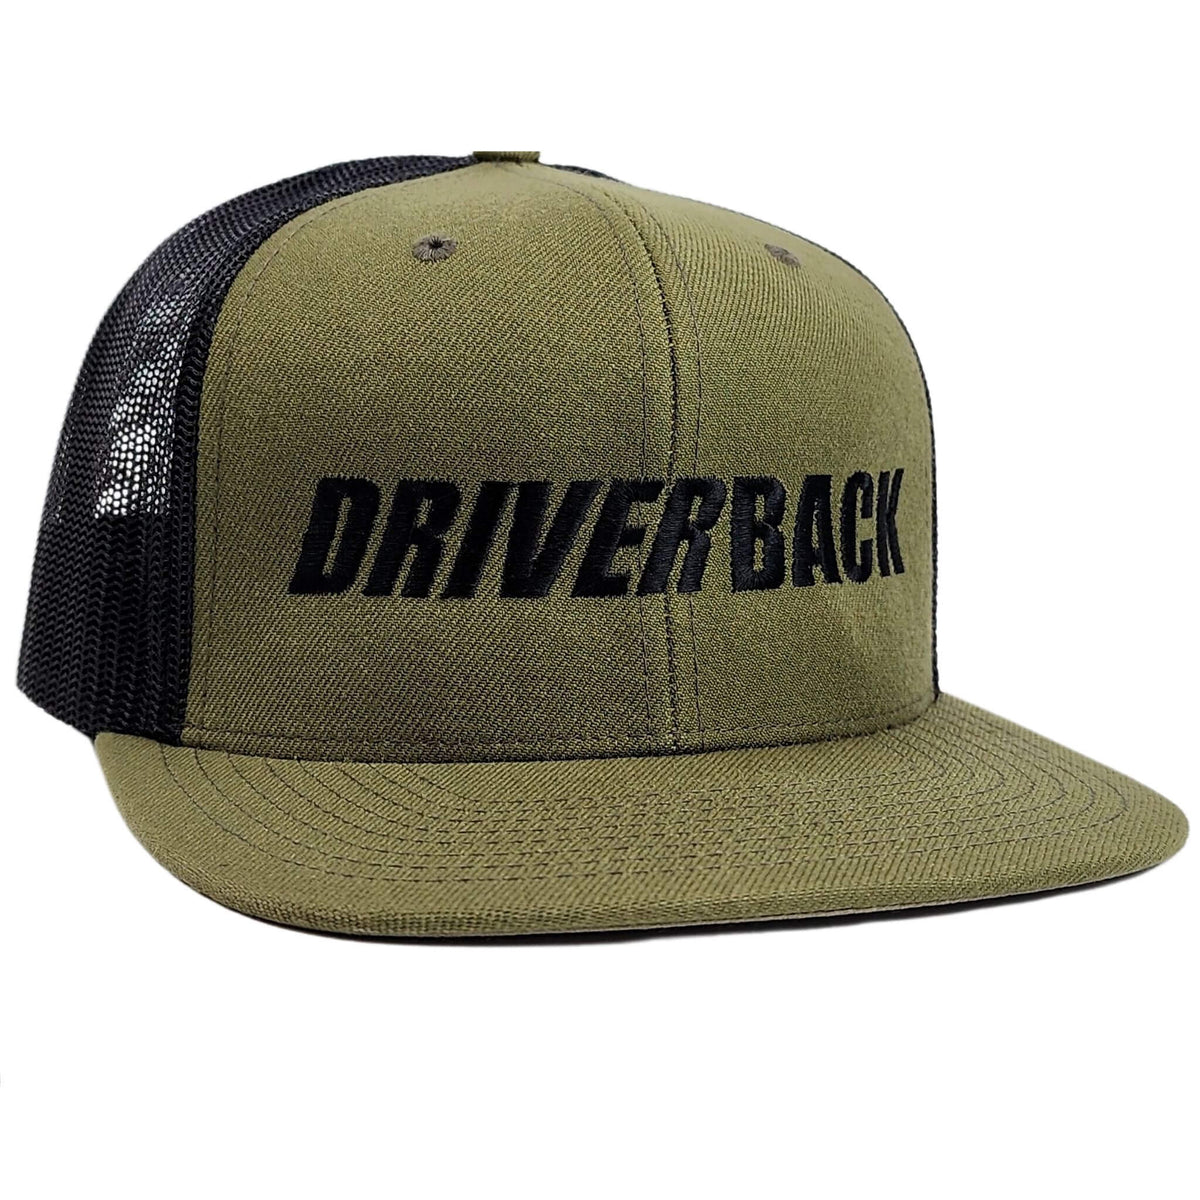 Richardson 511 Trucker with Black Embroidered Solid Logo - Loden/Black